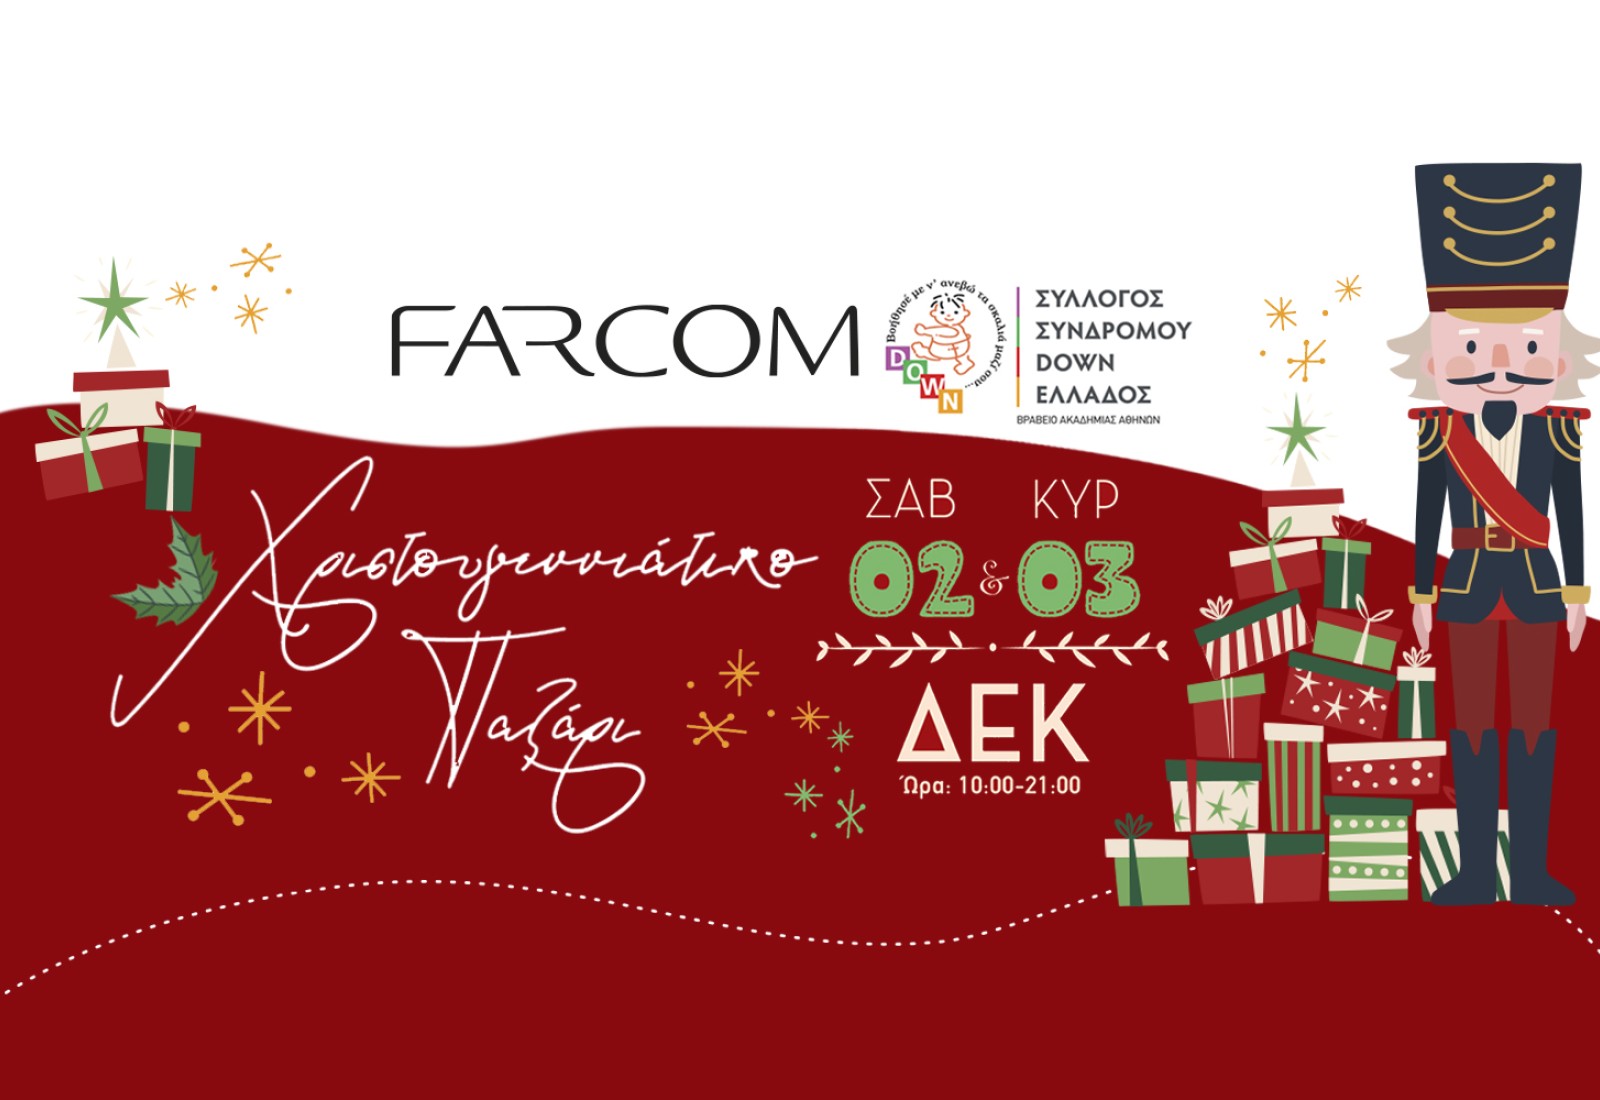 FARCOM supports the Christmas Bazaar of the Down Syndrome Association of Greece